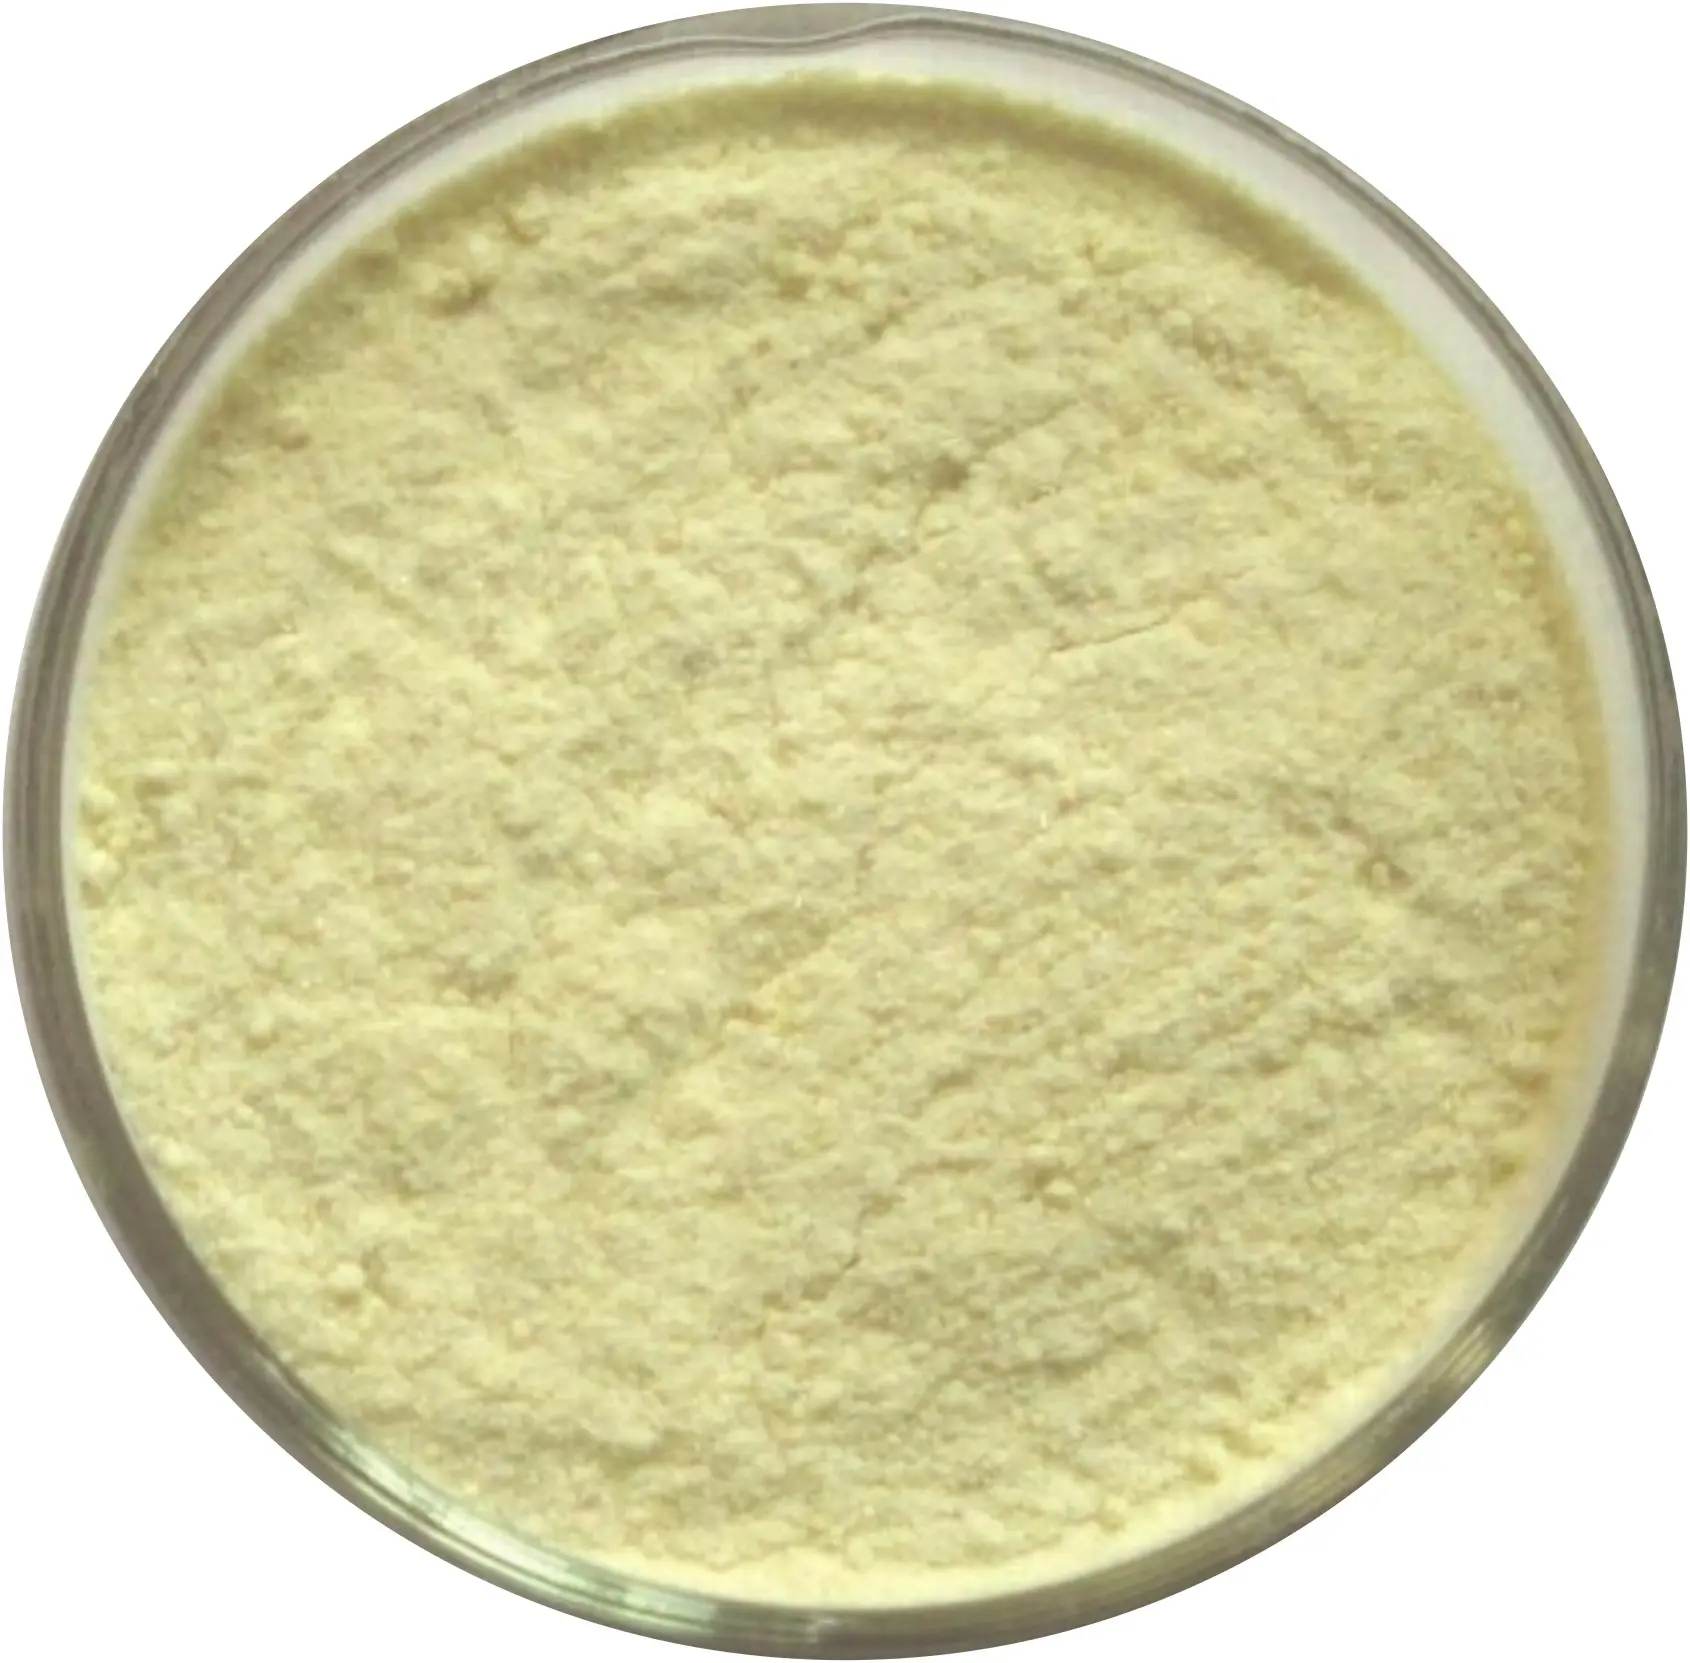 Professional Manufacturer Supply CAS 222400-29-5 Pea Protein